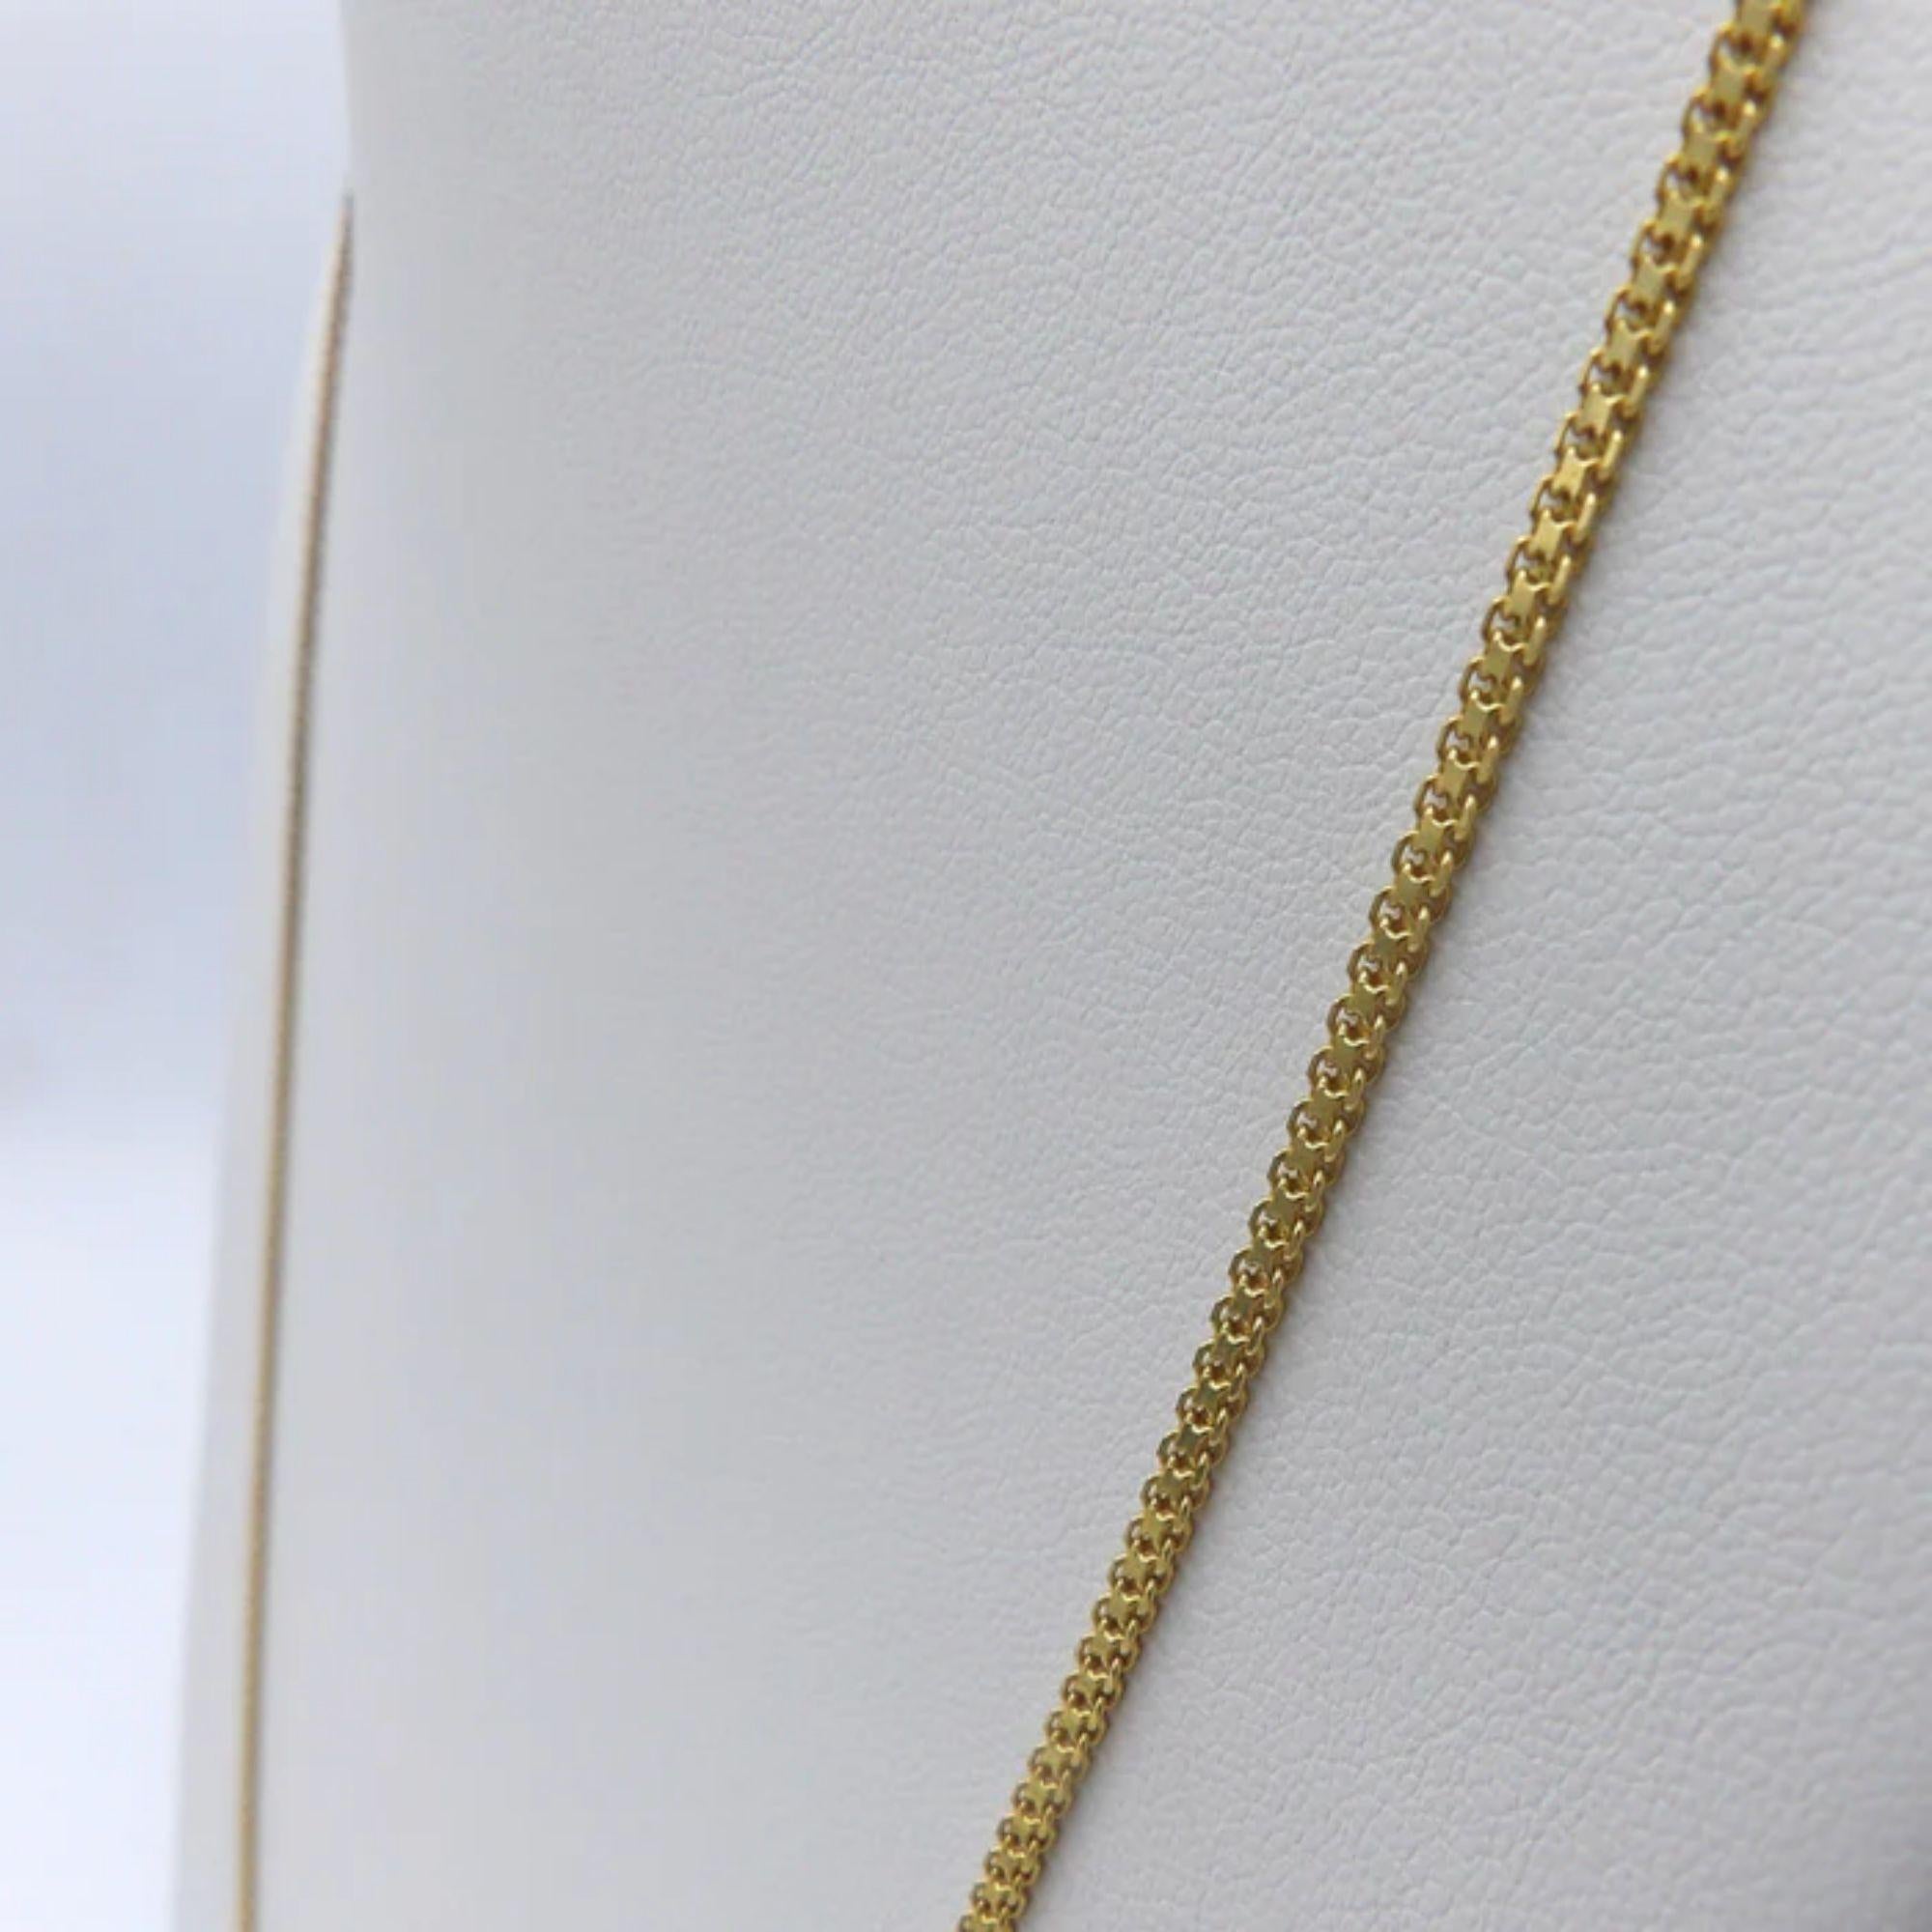 Vintage 22K Gold Flattened Double-Linked Long 28” Chain Necklace For Sale 2